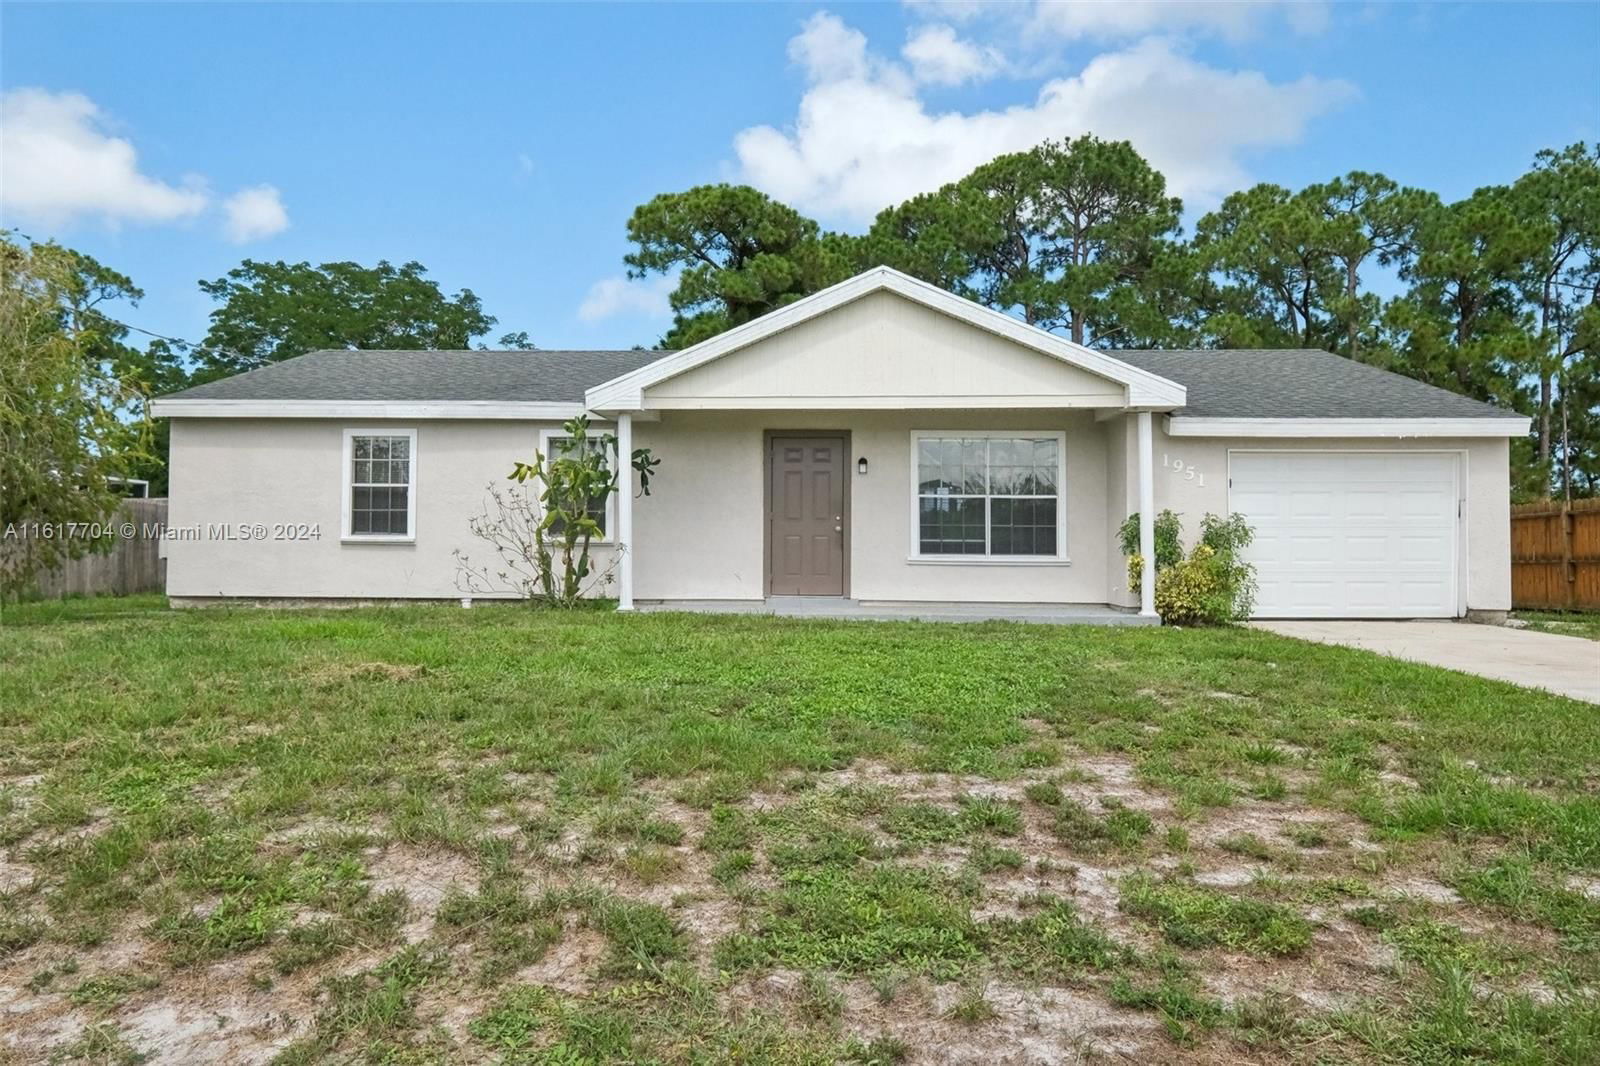 Real estate property located at 1951 Aneci St, St Lucie County, PORT ST LUCIE SECTION 13, Port St. Lucie, FL